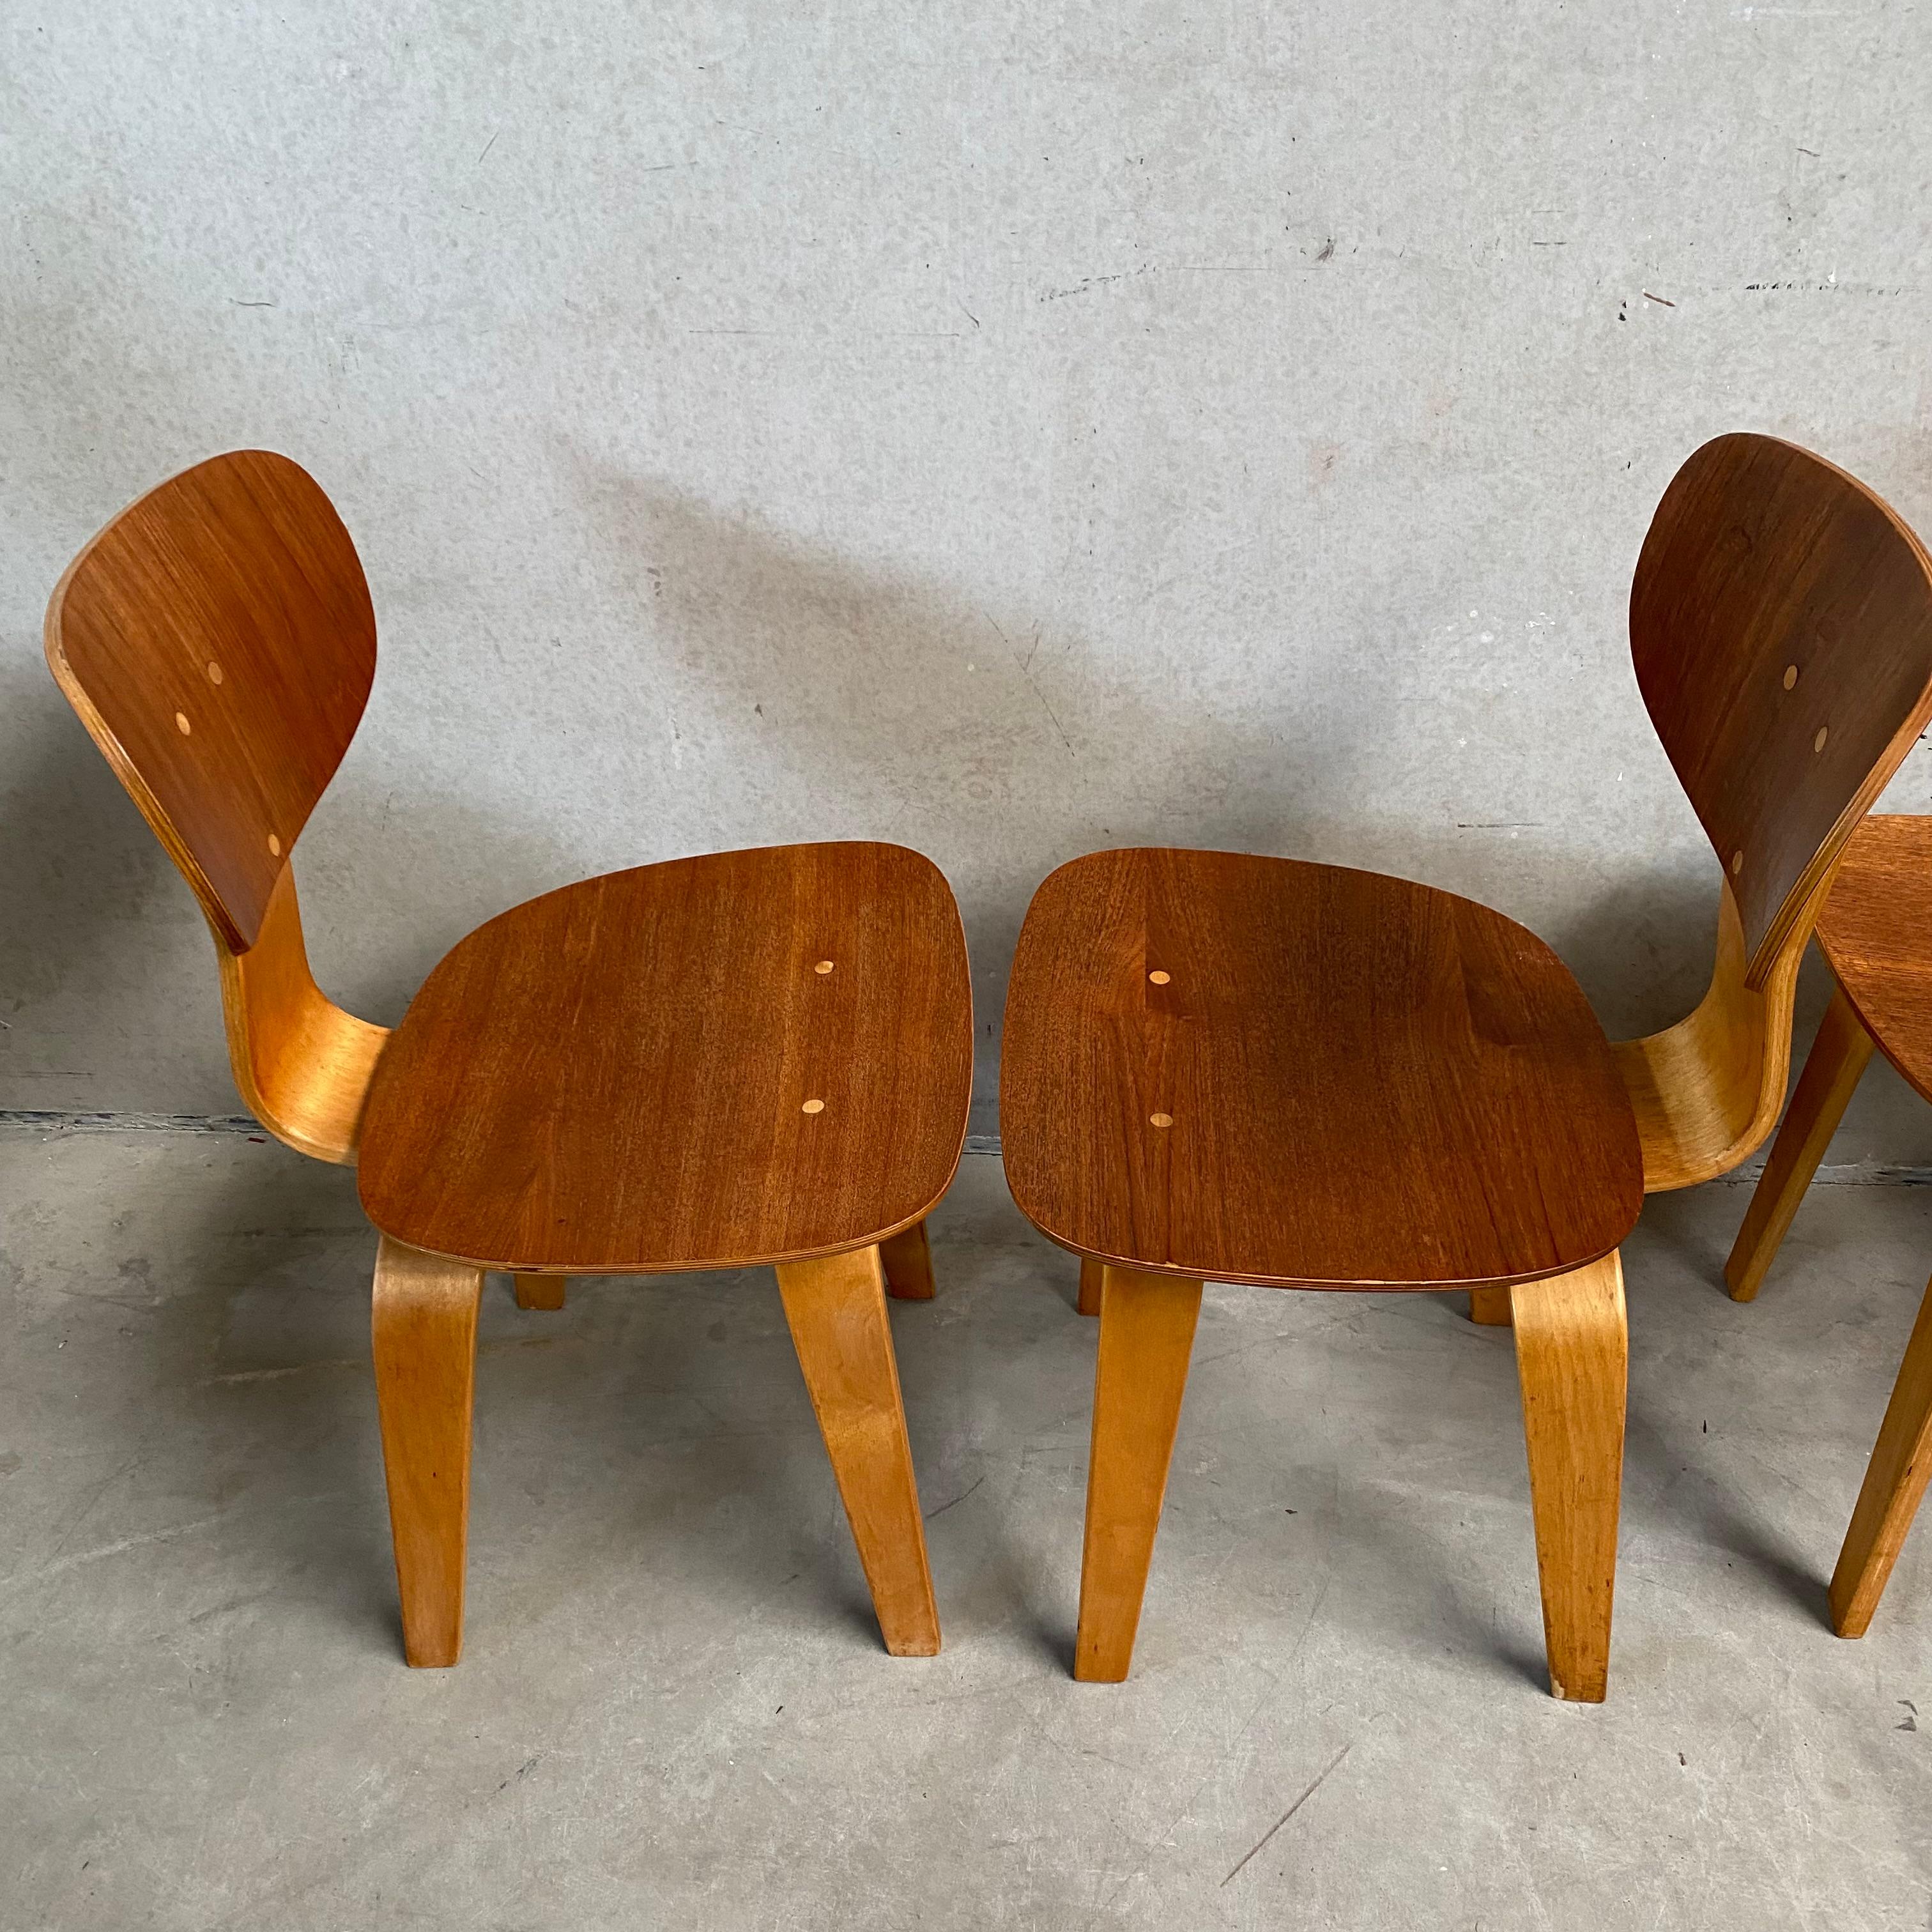 4 x Pastoe SB02 Dining Chairs by Cees Braakman Netherlands 1950 For Sale 2